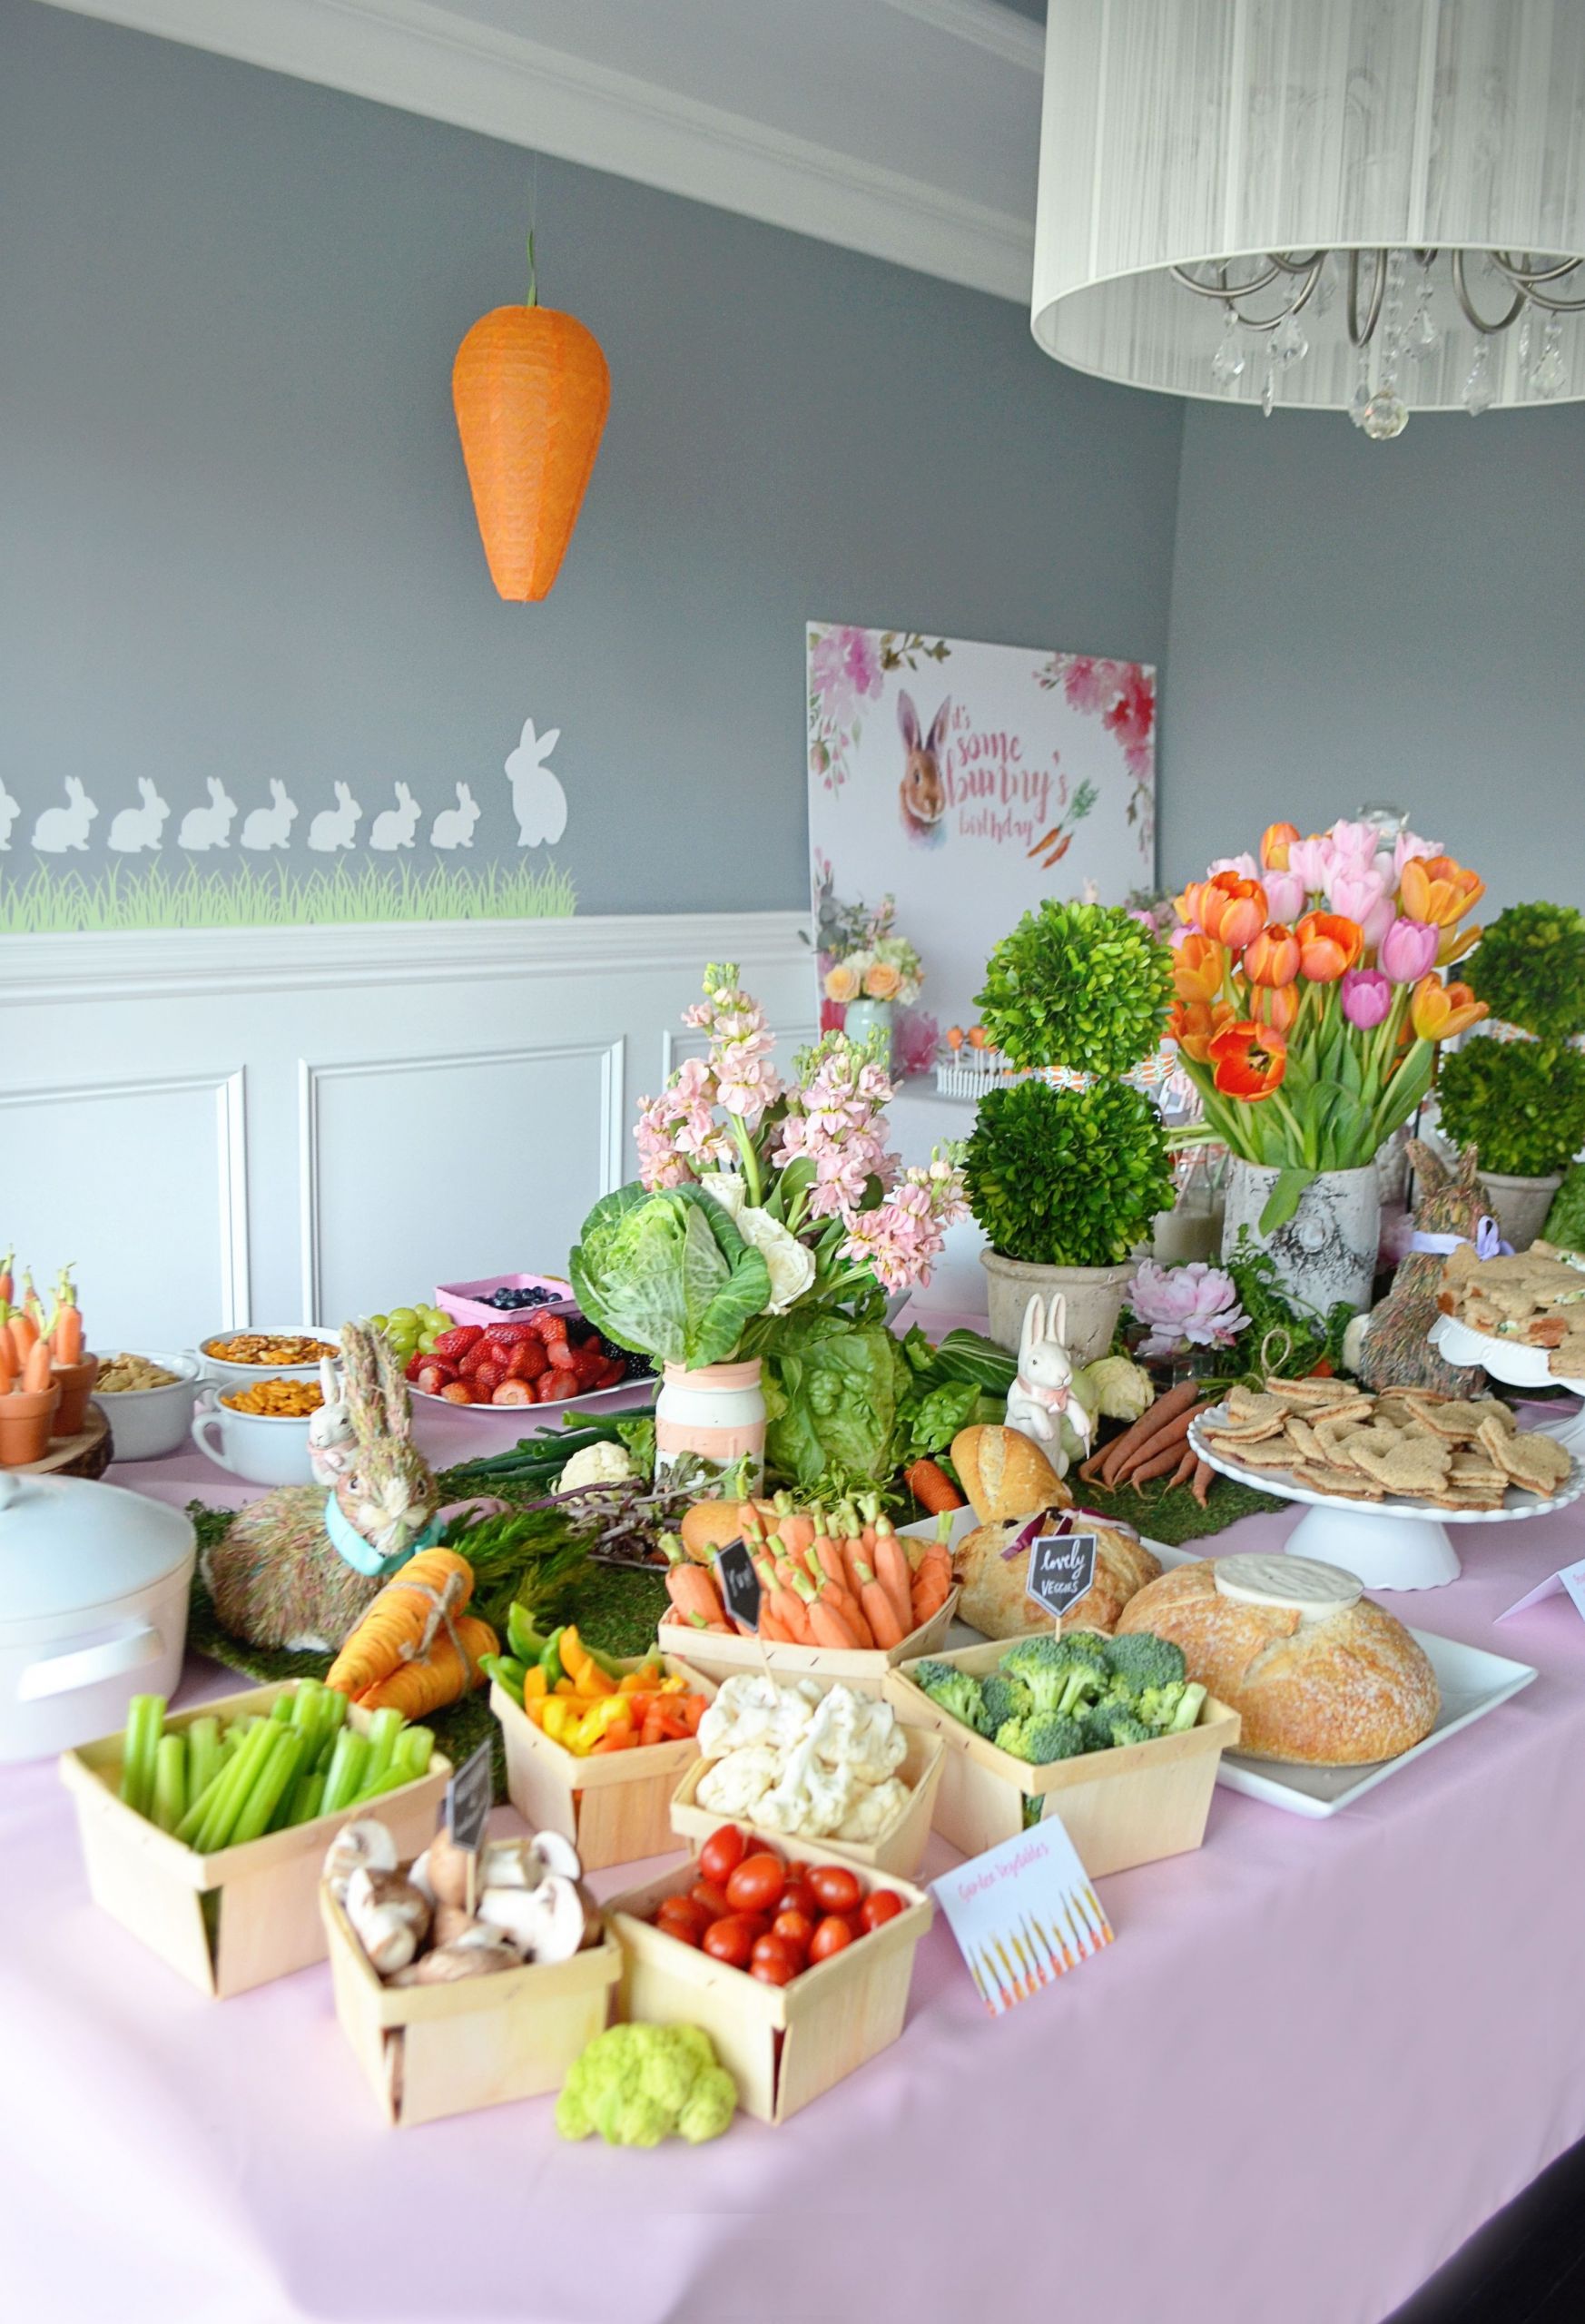 Food Ideas For Easter Party
 Shop the Party Bunny Themed Party Easter